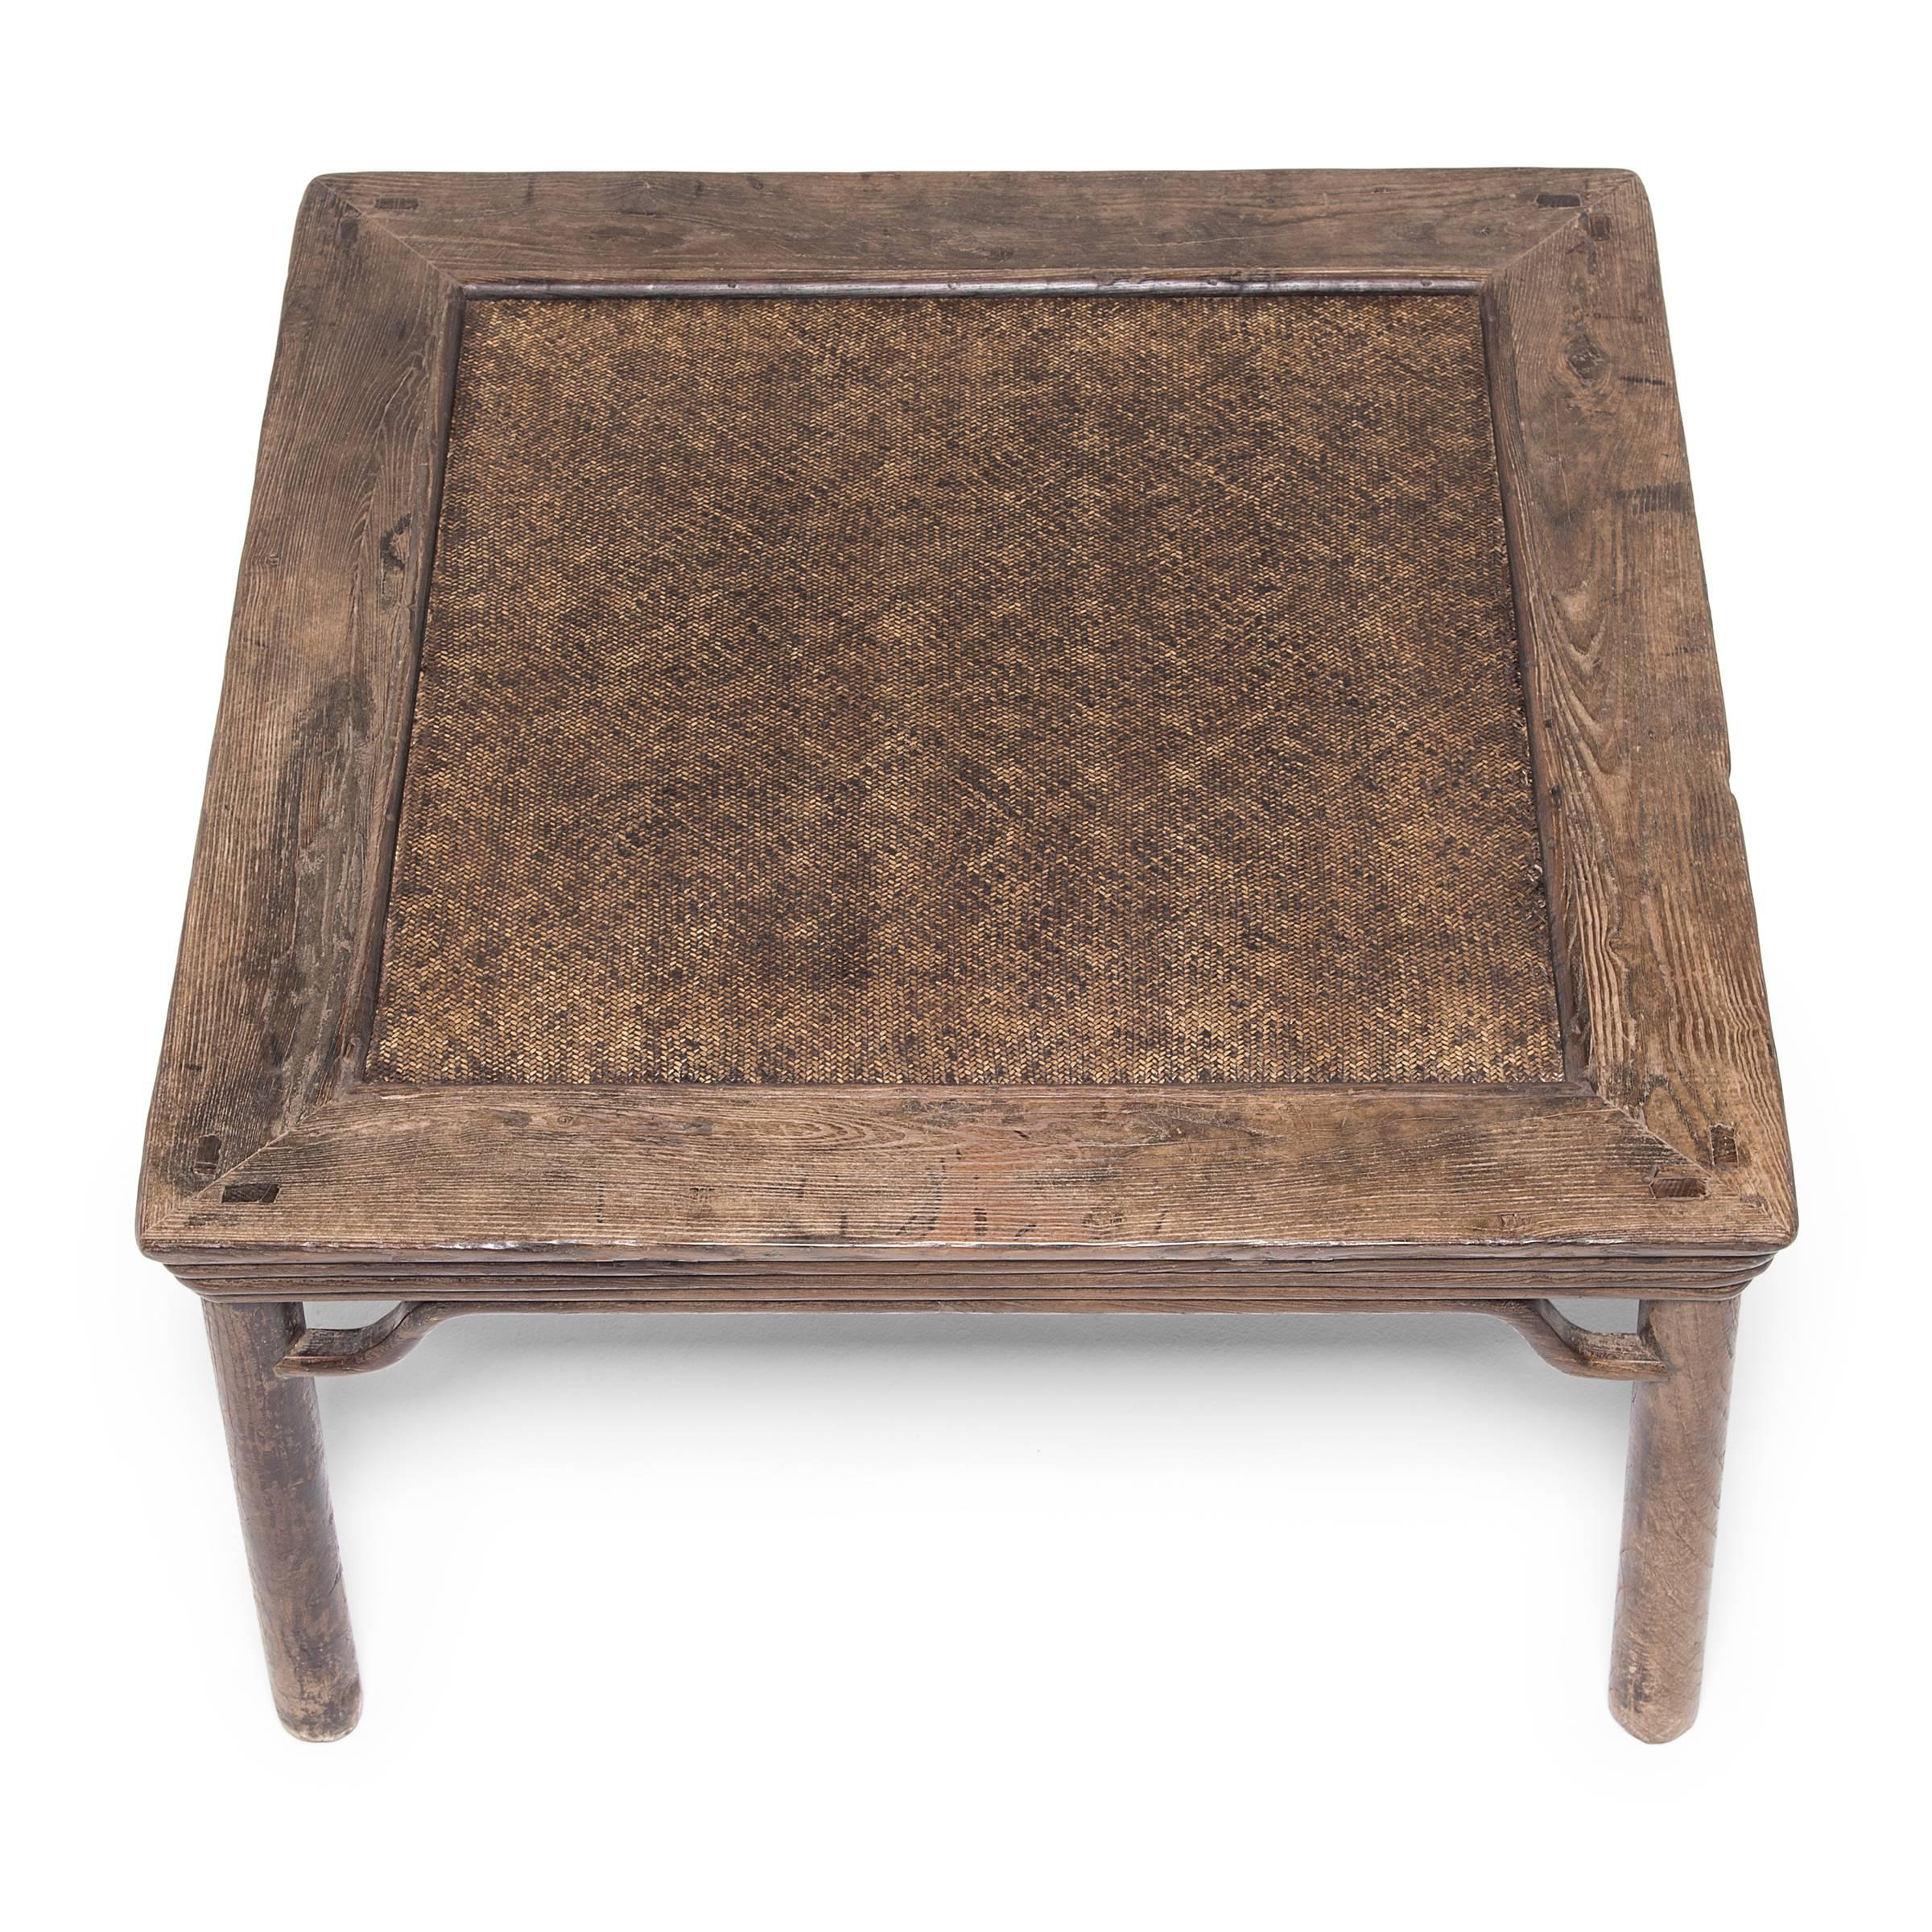 Hand-Woven Chinese Woven Top Square Table, c. 1900 For Sale